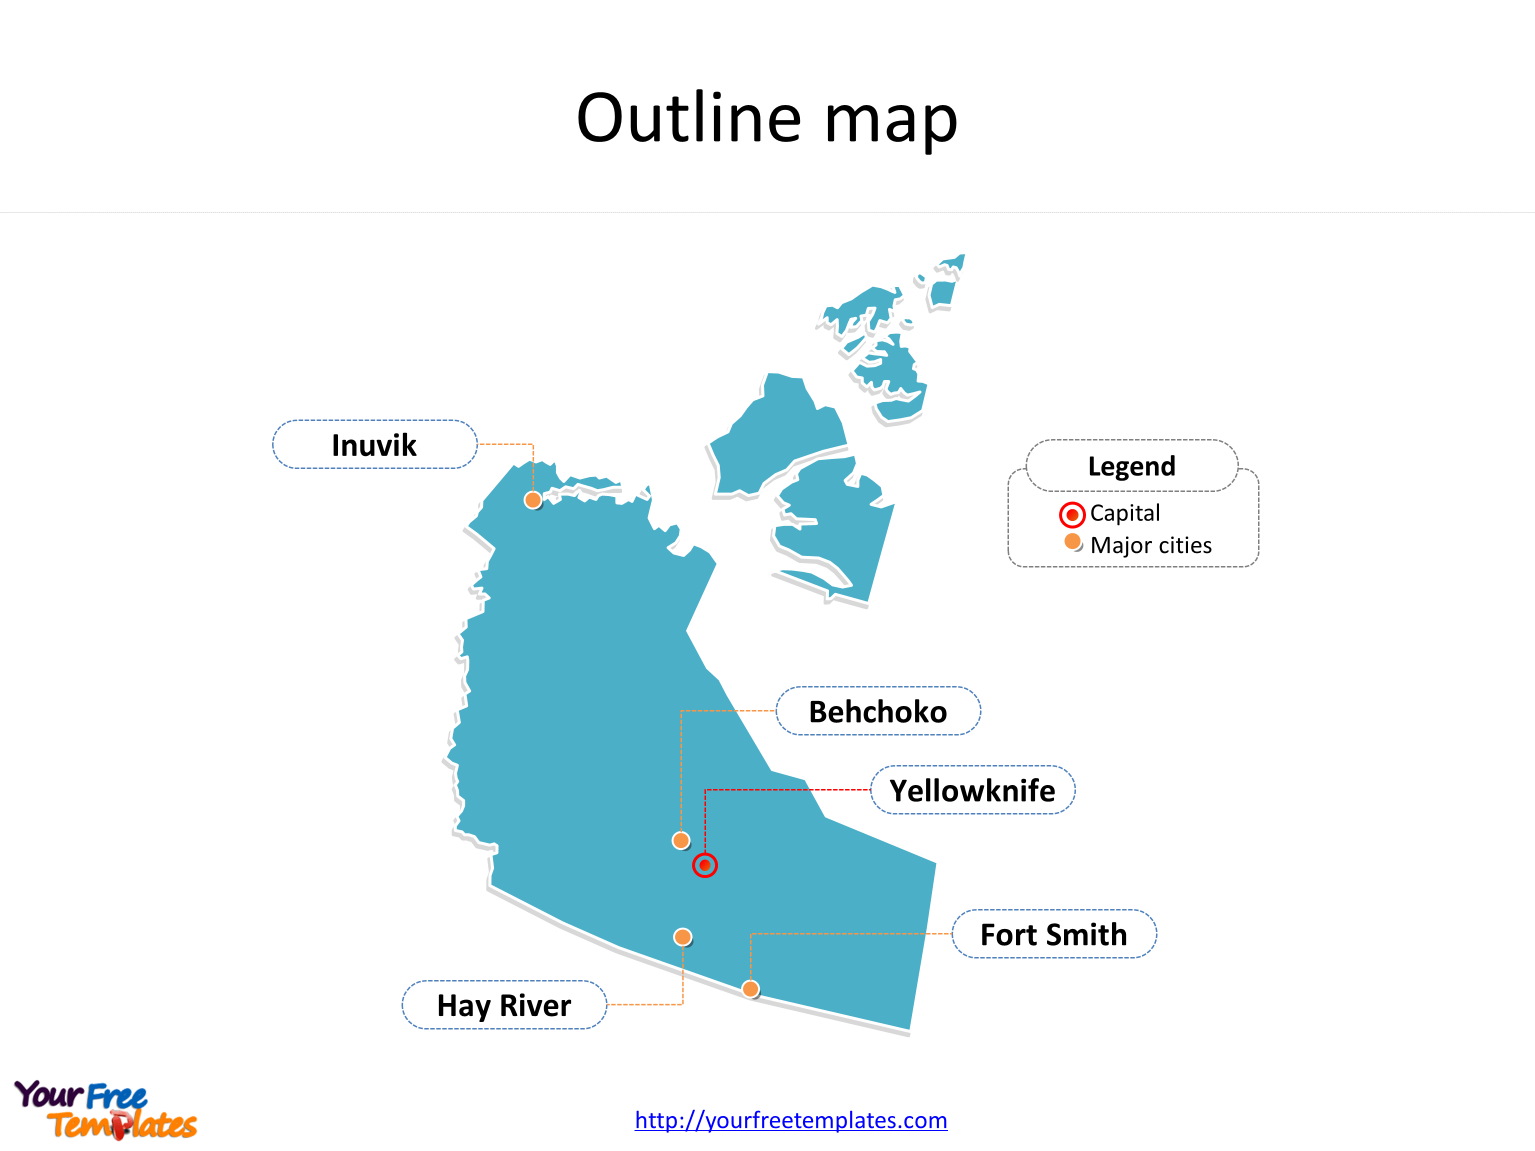 Province of Newfoundland and Labrador map with outline and cities labeled on the Newfoundland and Labrador maps PowerPoint templates